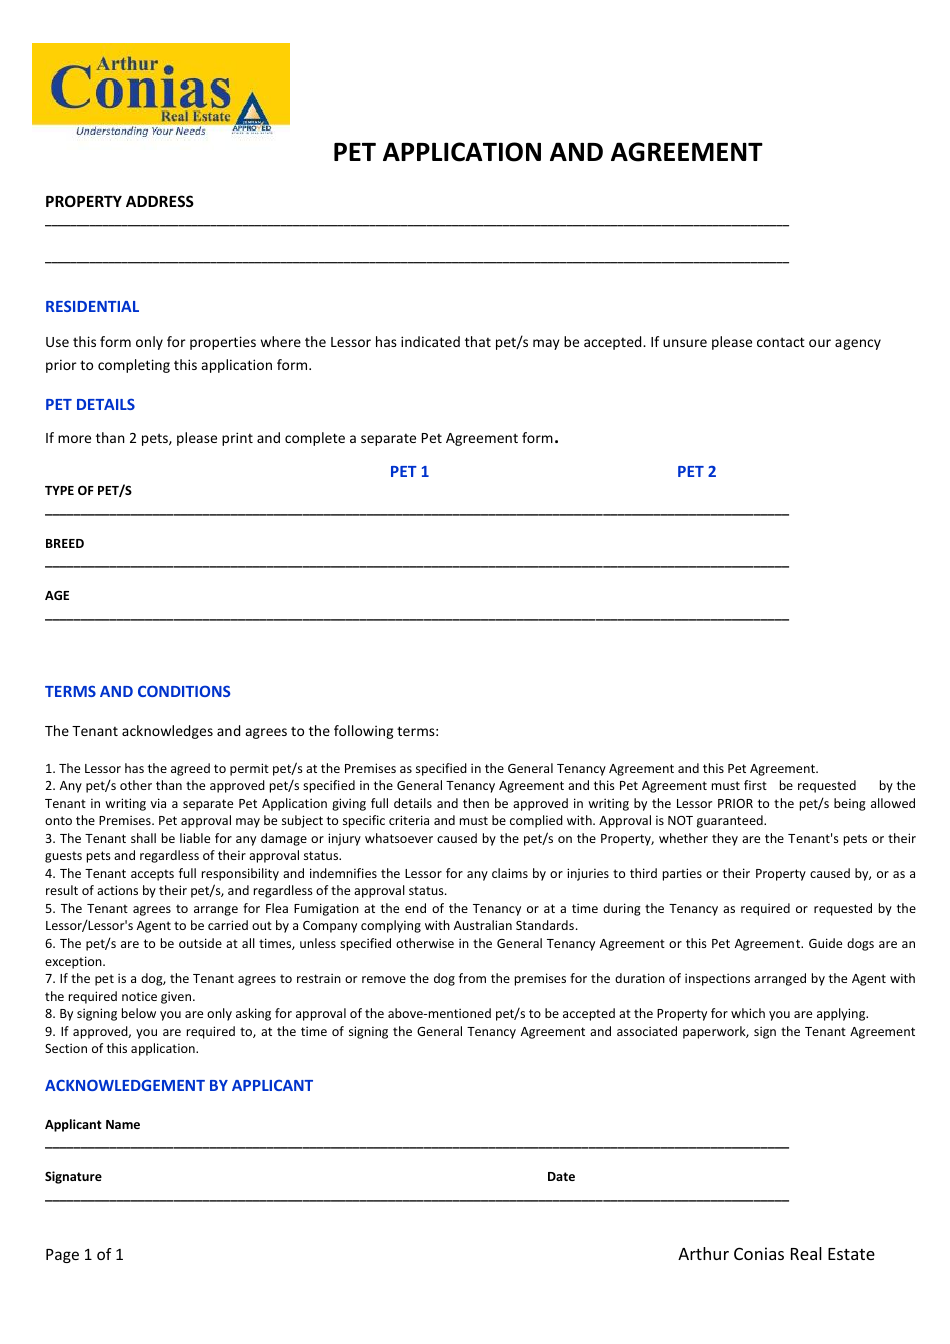 Pet Application and Agreement Form - Arthur Conias Real Estate - Australia, Page 1